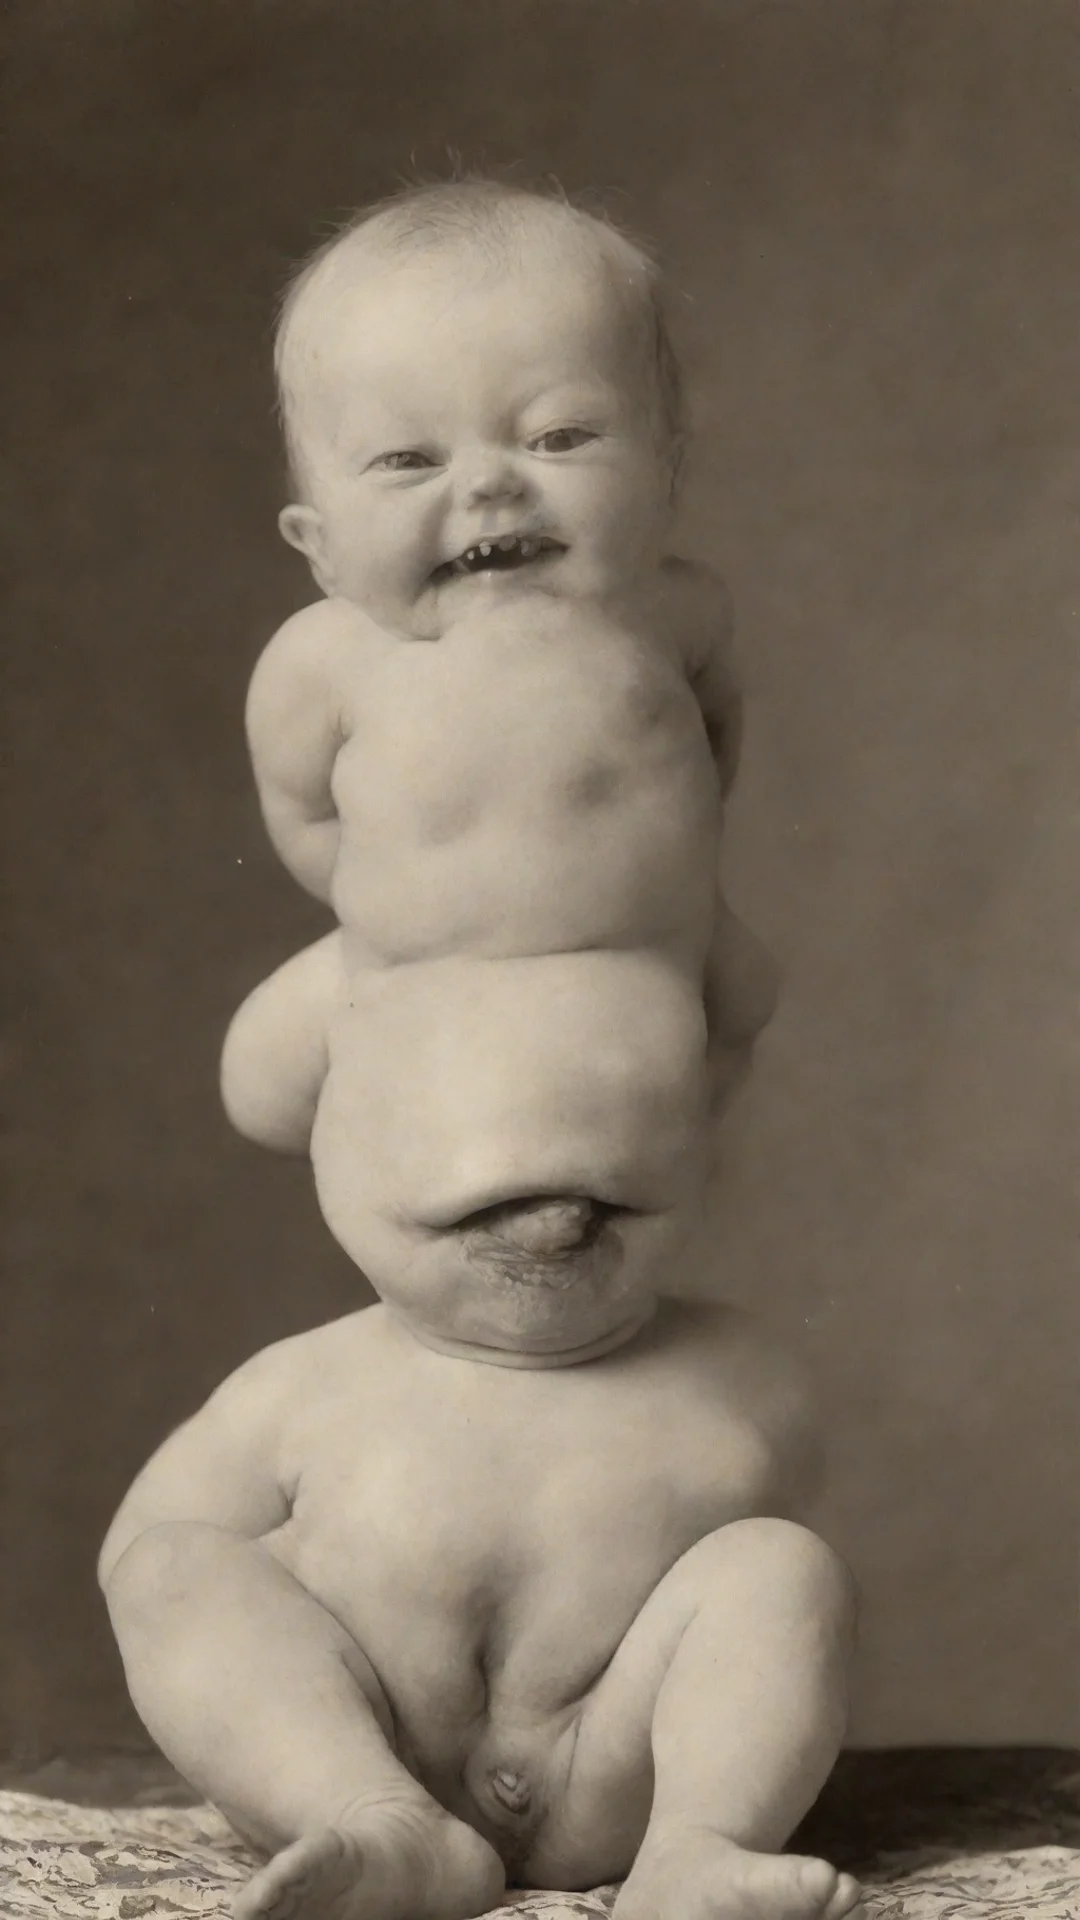 aiamazing ugly baby from the 1900s awesome portrait 2 tall